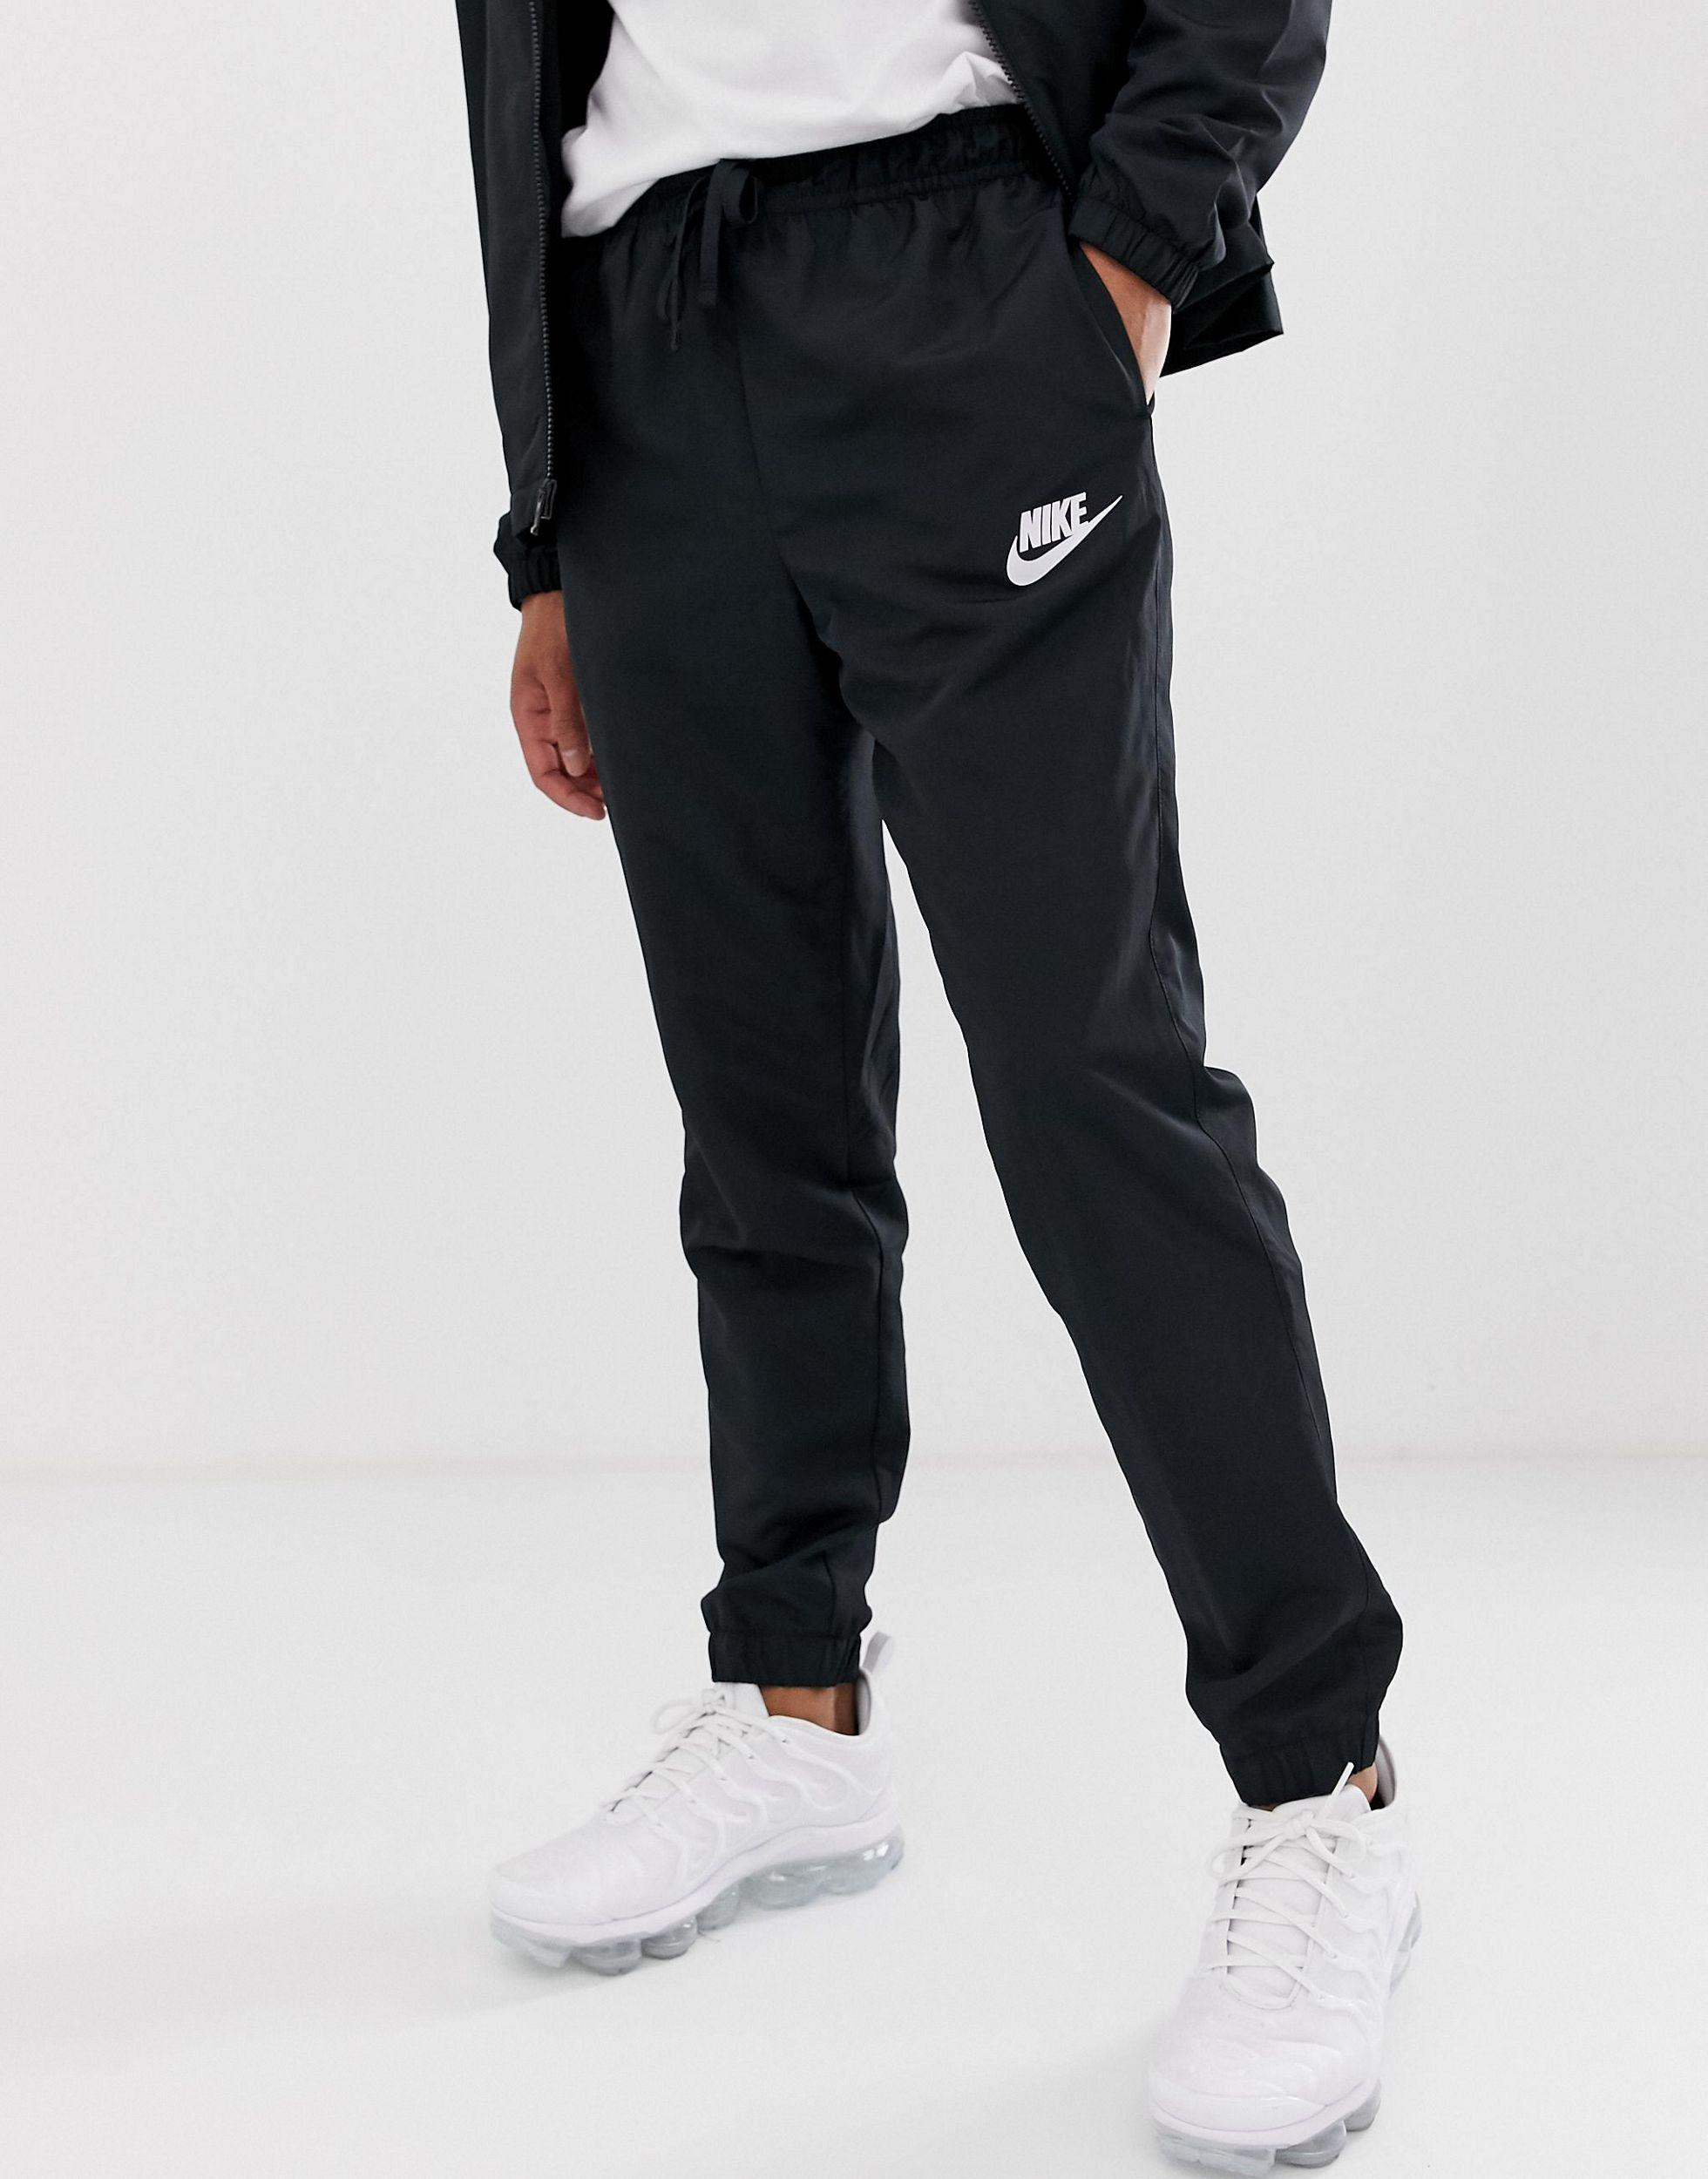 Nike Synthetic Tracksuit Set in Black for Men - Lyst